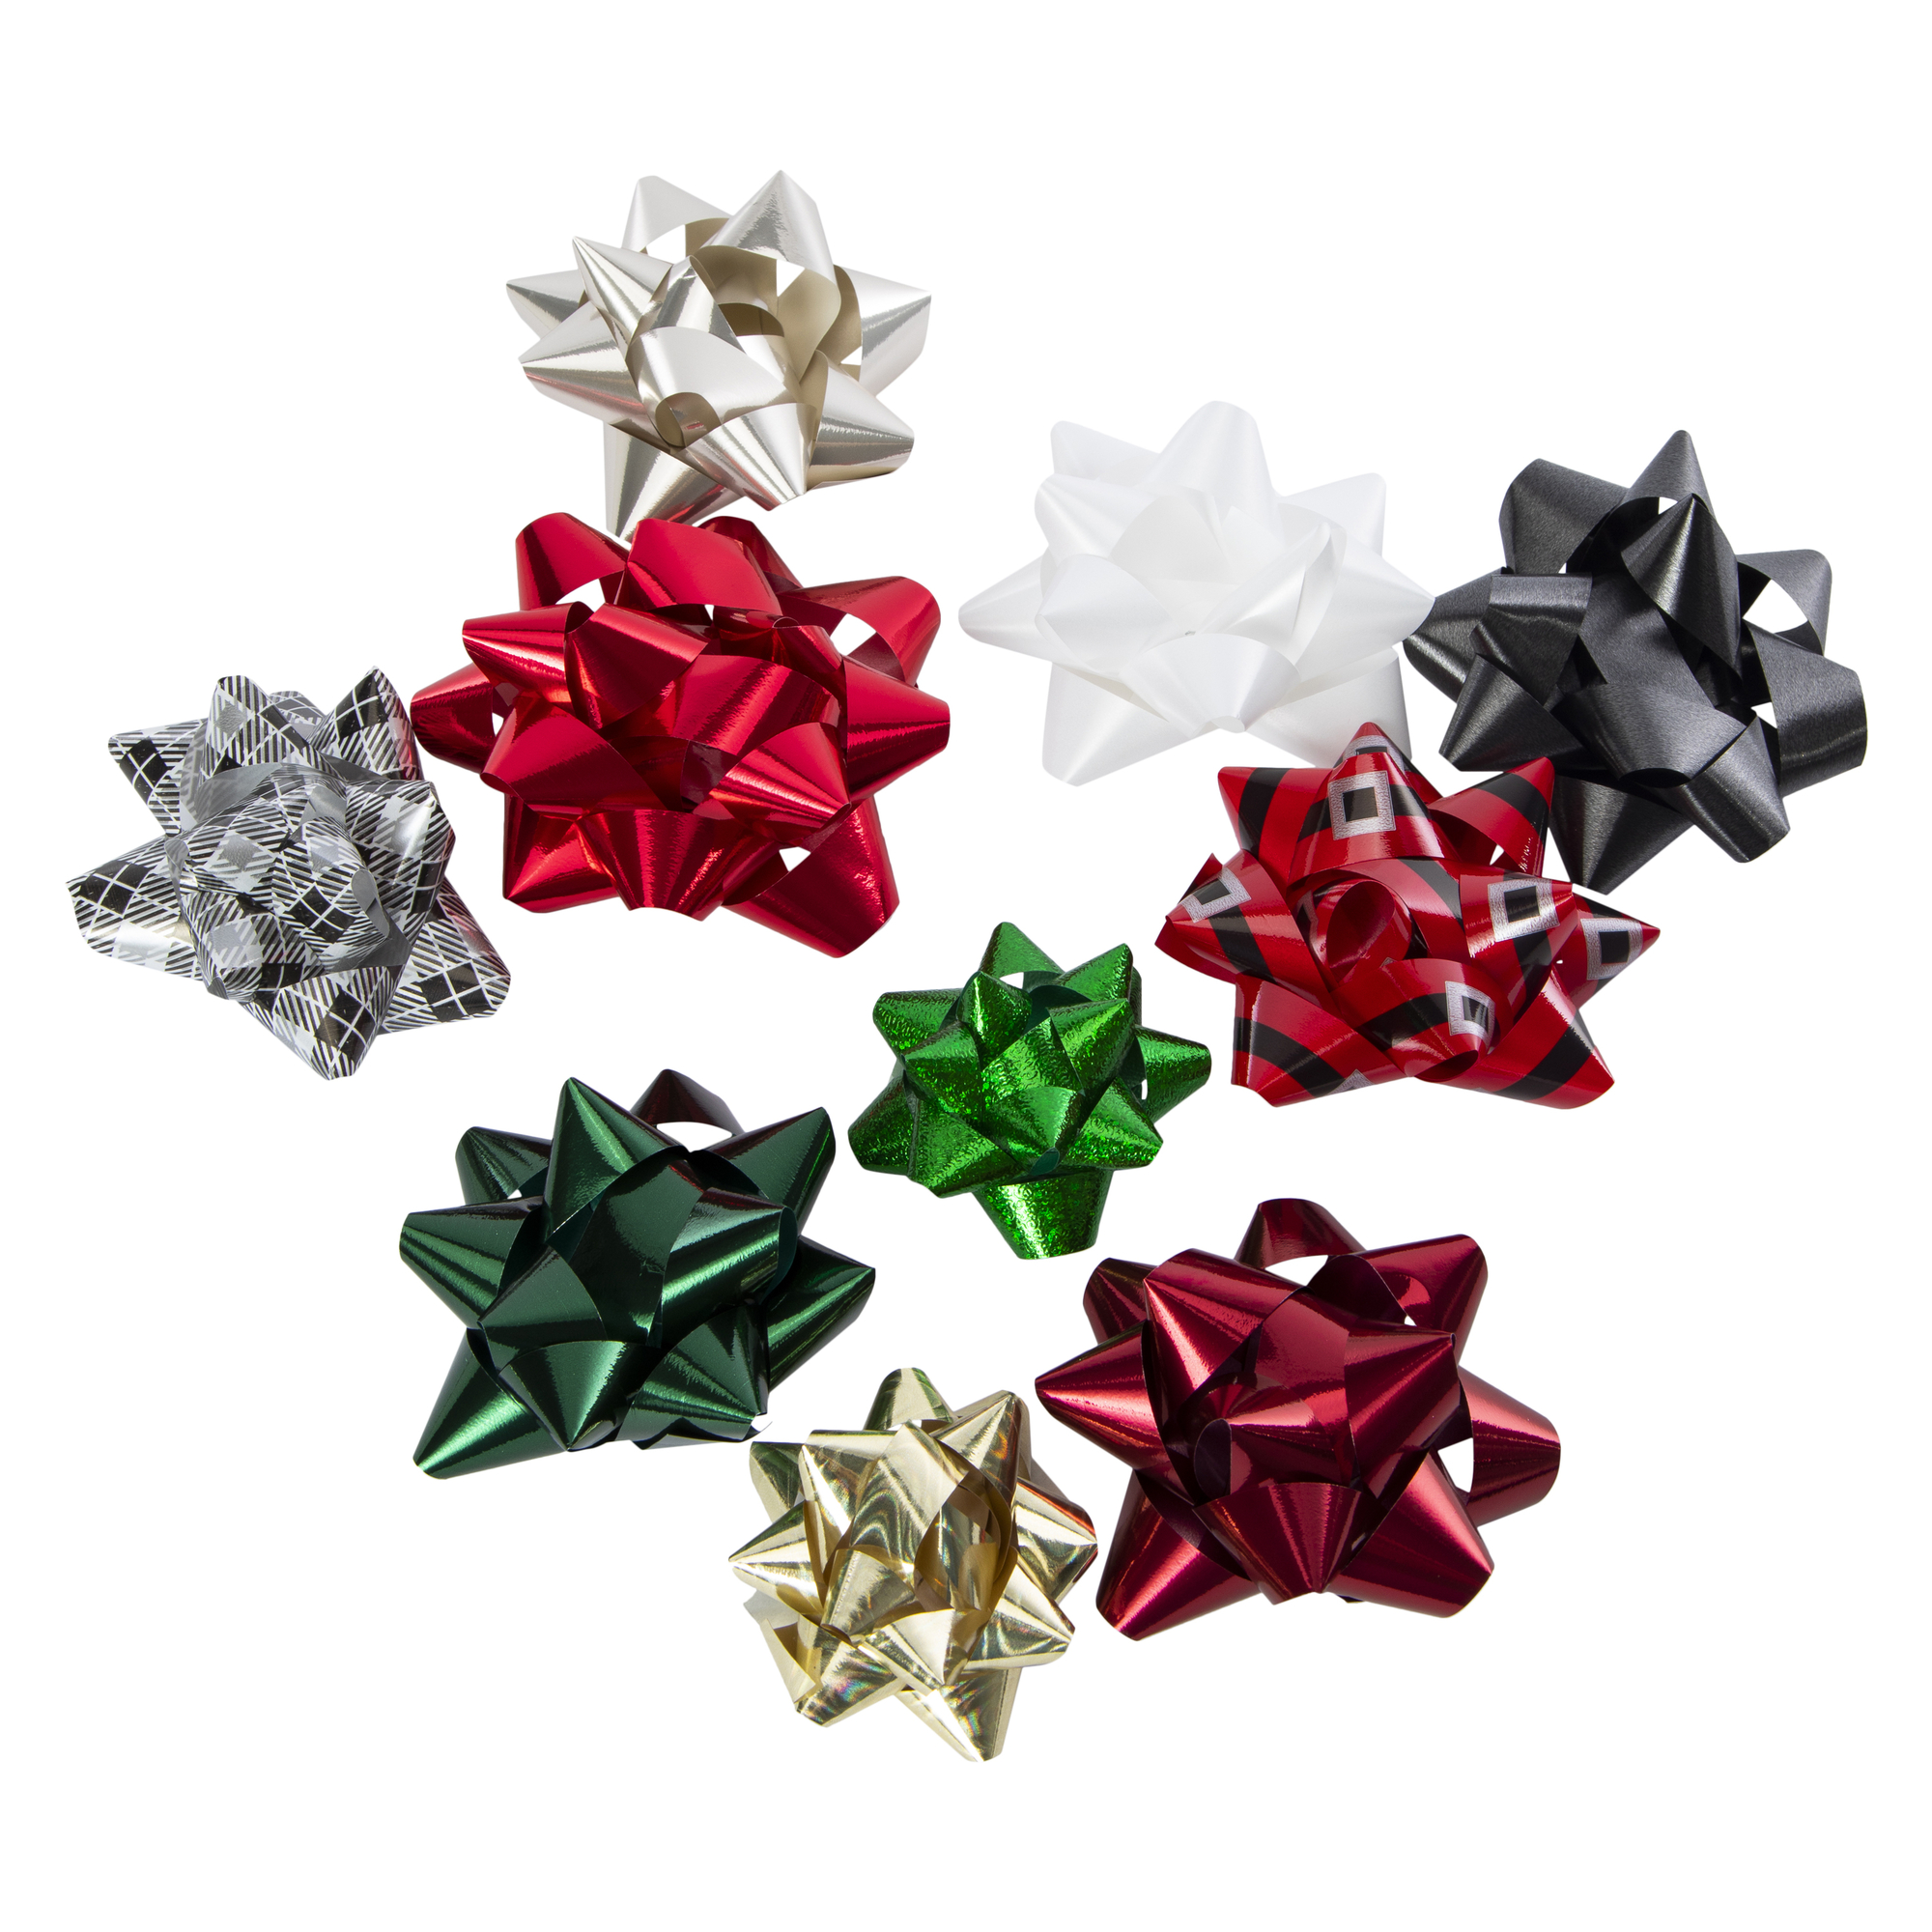 40-count gift bows